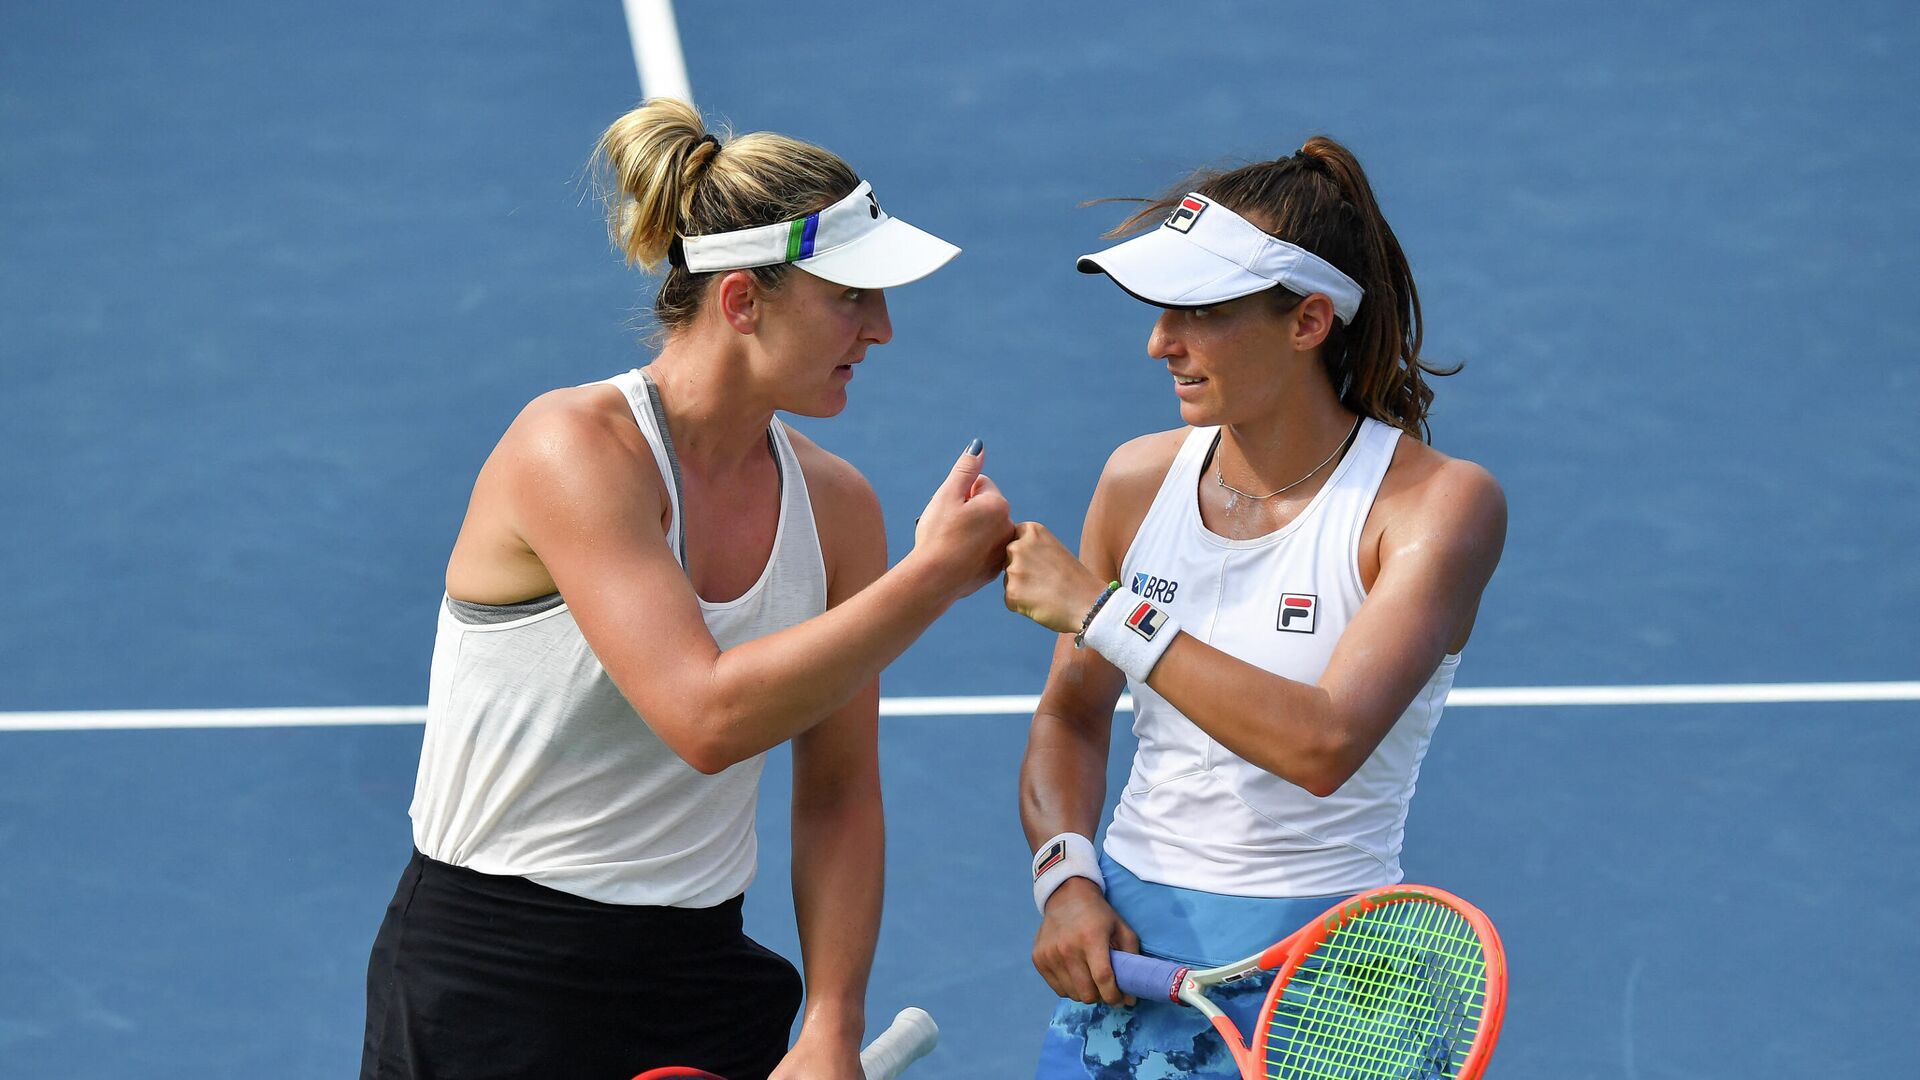 MONTREAL, QC - AUGUST 13: Luisa Stefani (R) of Brazil and Gabriela Dabrowski (L) of Canada encourage each other during their Womens Doubles Quarterfinals match against Elise Mertens of Belgium and Aryna Sabalenka of Belarus on Day Five of the National Bank Open presented by Rogers at IGA Stadium on August 13, 2021 in Montreal, Canada.   Minas Panagiotakis/Getty Images/AFP (Photo by Minas Panagiotakis / GETTY IMAGES NORTH AMERICA / Getty Images via AFP) - РИА Новости, 1920, 16.08.2021